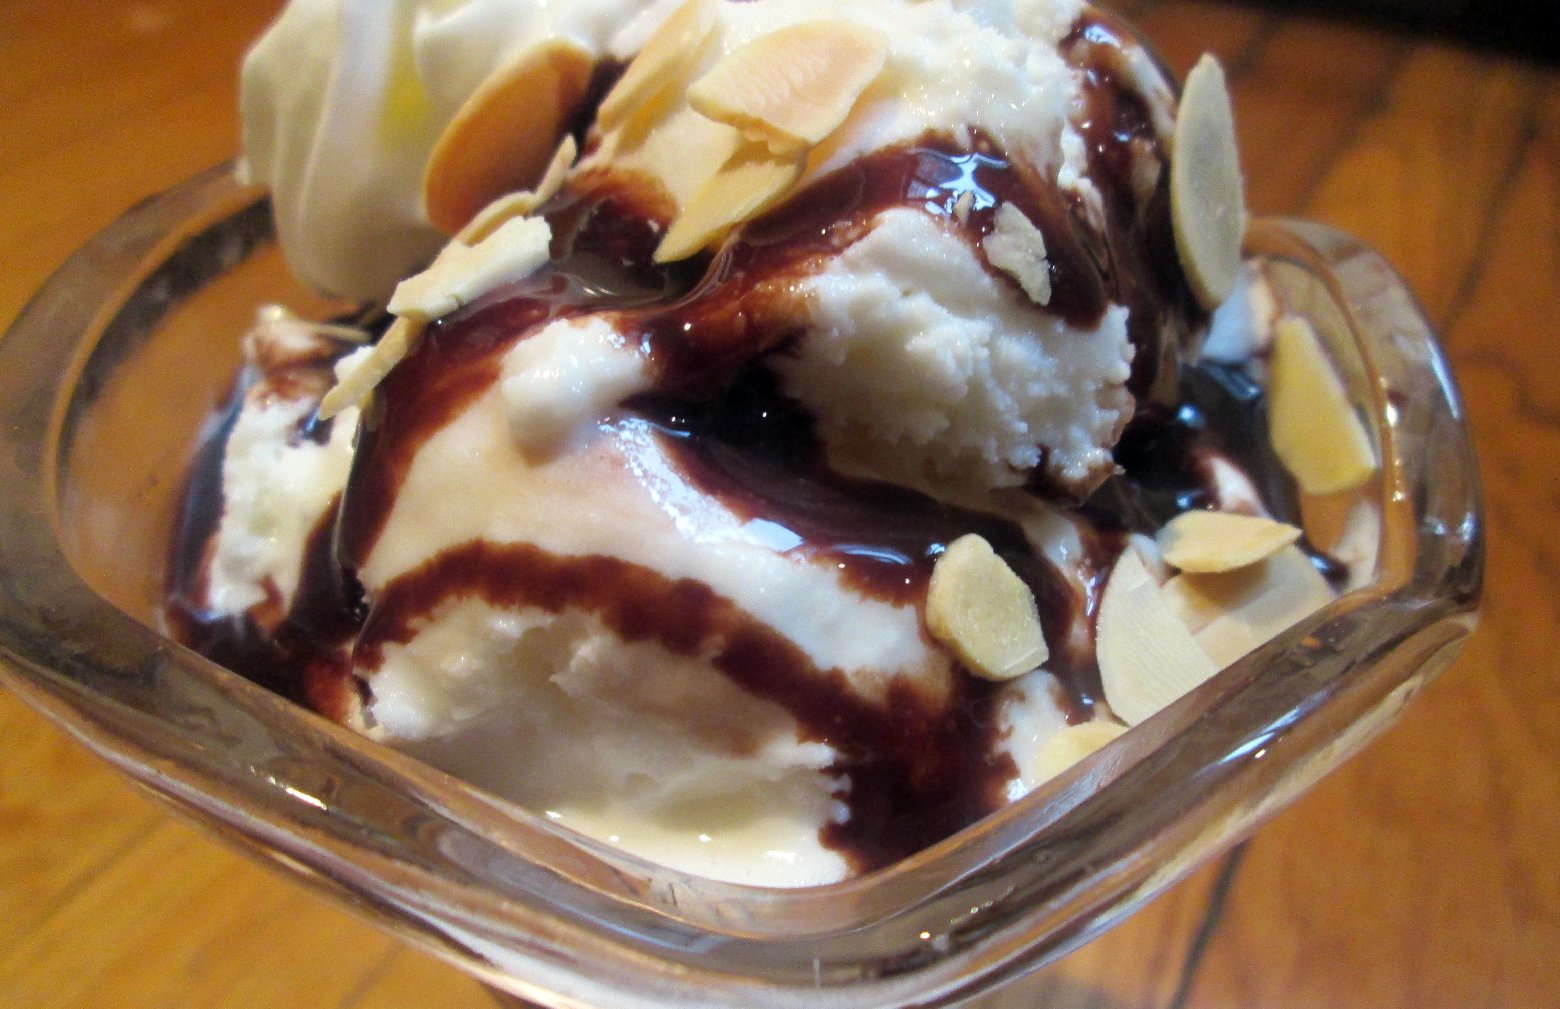 A sundae with hot fudge, almonds and whipped cream. Photo: Laura B. Weiss for NPR